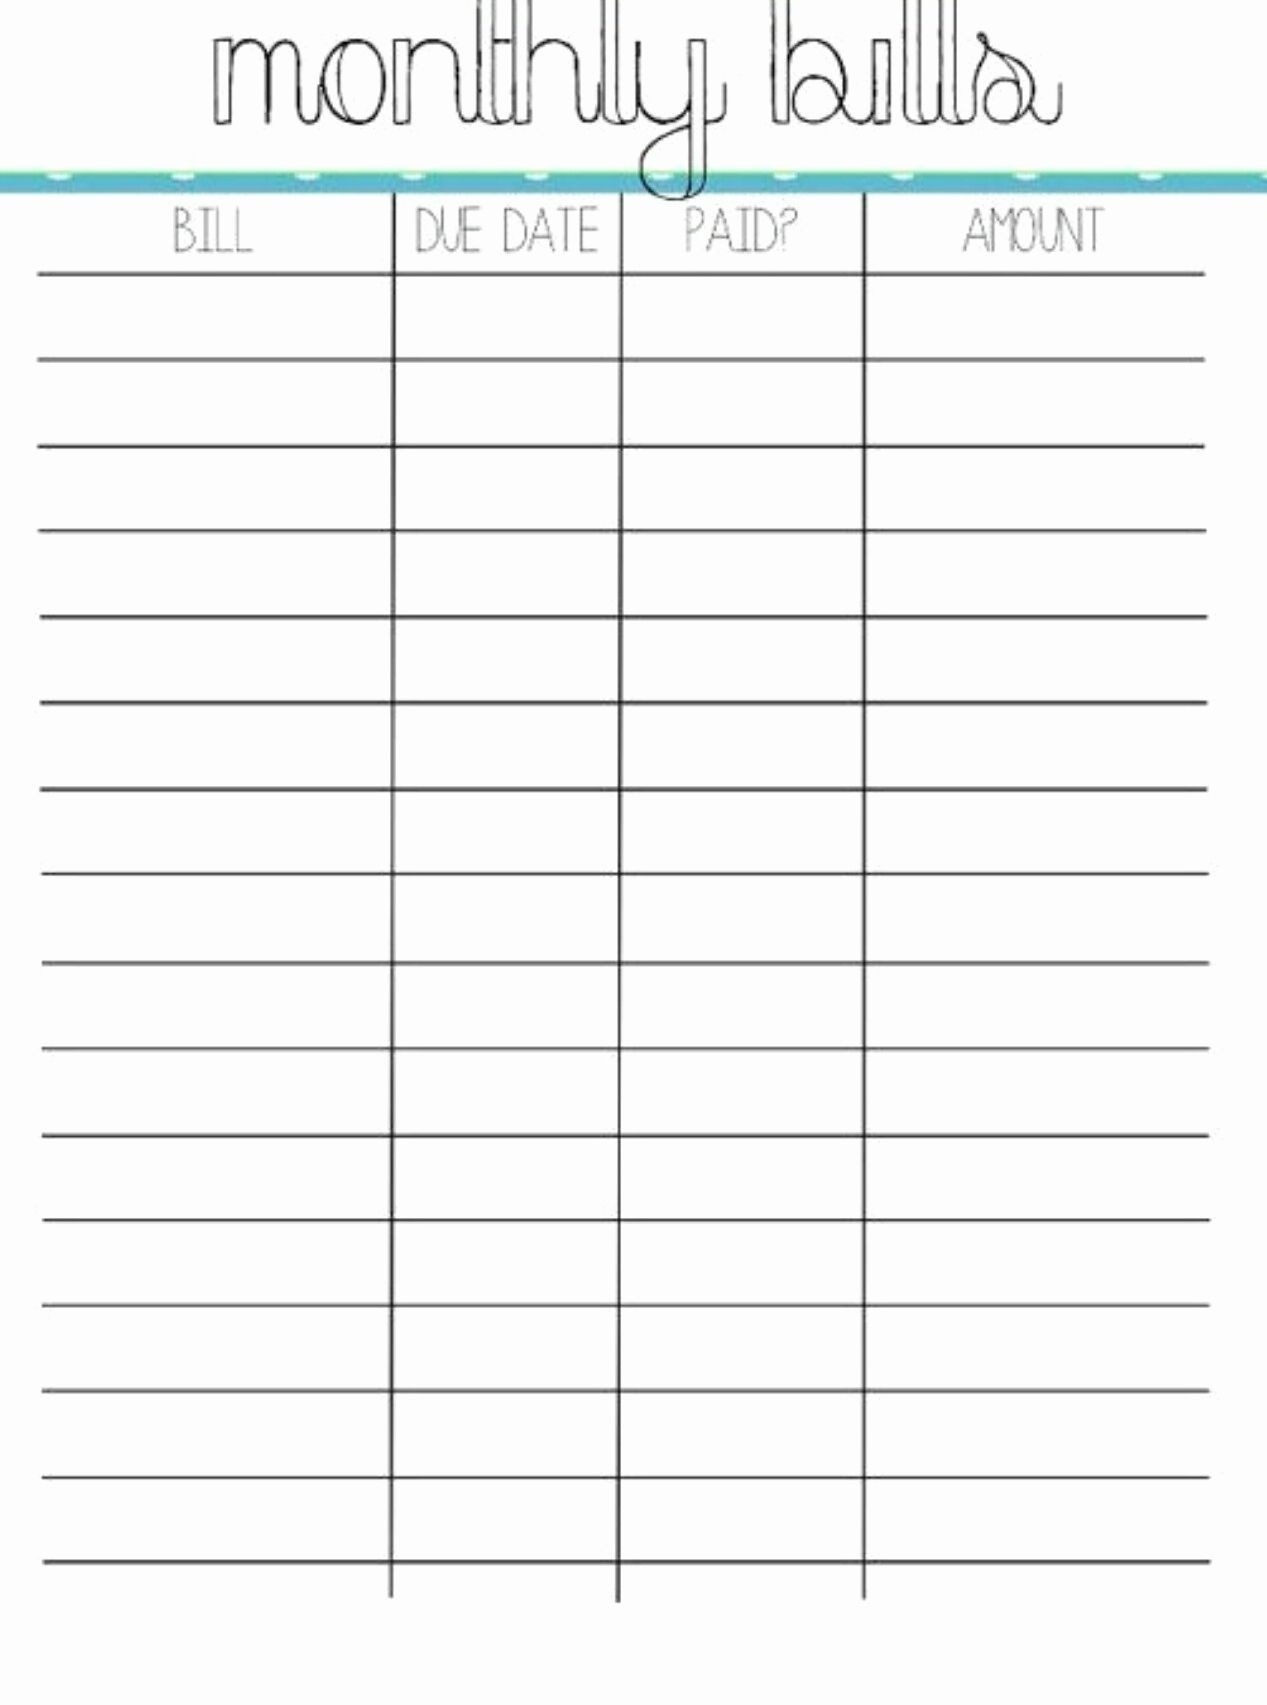 Budget Worksheet Pdf, Excel Template | Monthly Budget  Blank Monthly Bill Worksheet